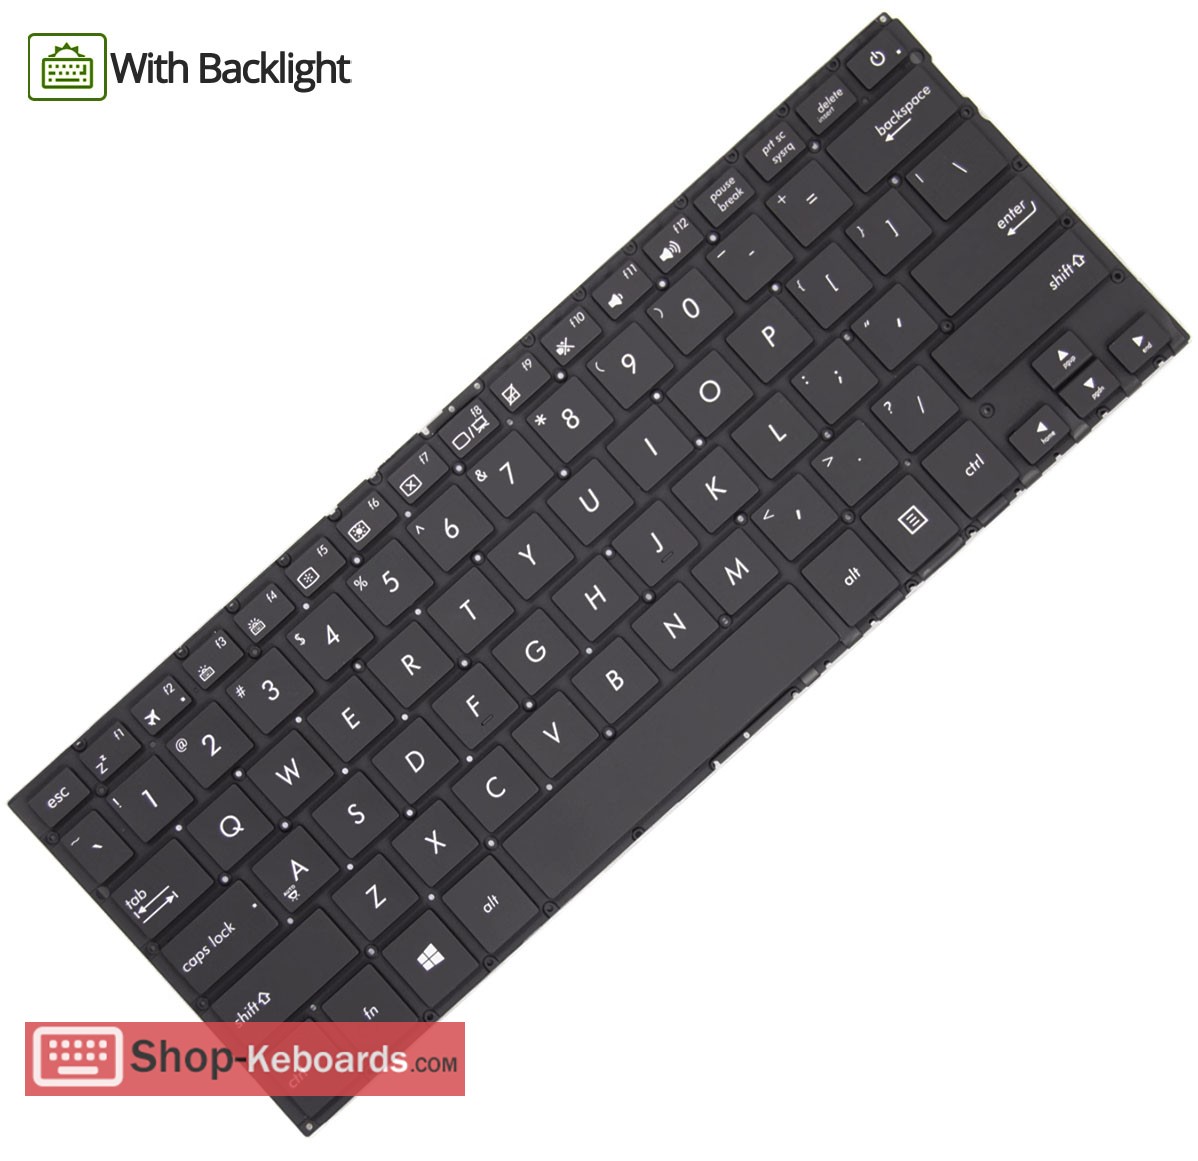 Asus 0KNB0-2627AR00 Keyboard replacement